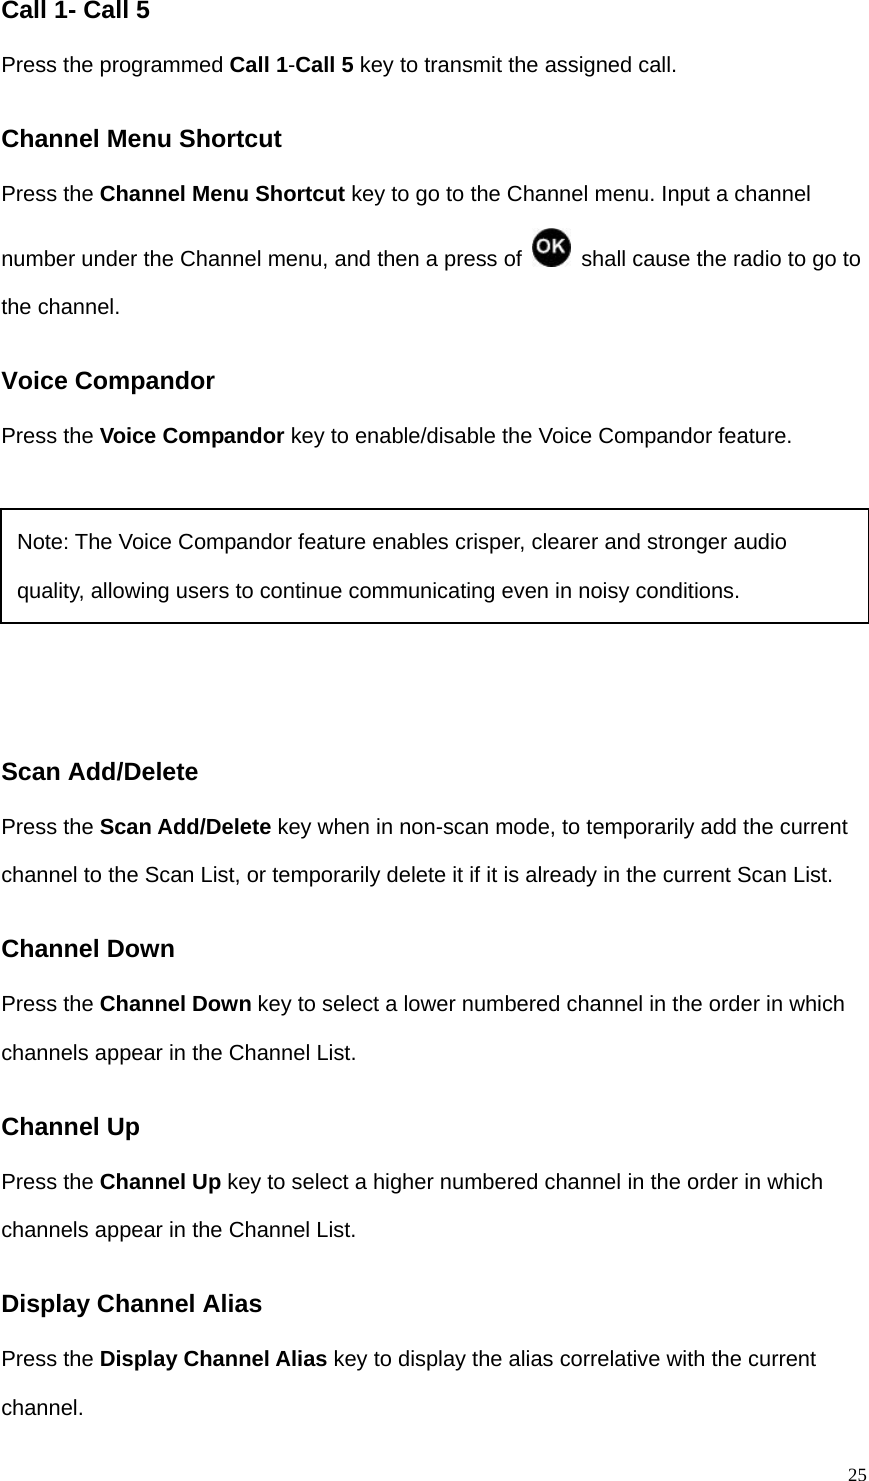   25Call 1- Call 5 Press the programmed Call 1-Call 5 key to transmit the assigned call.   Channel Menu Shortcut Press the Channel Menu Shortcut key to go to the Channel menu. Input a channel number under the Channel menu, and then a press of    shall cause the radio to go to the channel.   Voice Compandor Press the Voice Compandor key to enable/disable the Voice Compandor feature.     Scan Add/Delete Press the Scan Add/Delete key when in non-scan mode, to temporarily add the current channel to the Scan List, or temporarily delete it if it is already in the current Scan List. Channel Down Press the Channel Down key to select a lower numbered channel in the order in which channels appear in the Channel List.   Channel Up Press the Channel Up key to select a higher numbered channel in the order in which channels appear in the Channel List. Display Channel Alias Press the Display Channel Alias key to display the alias correlative with the current channel.   Note: The Voice Compandor feature enables crisper, clearer and stronger audio quality, allowing users to continue communicating even in noisy conditions. 